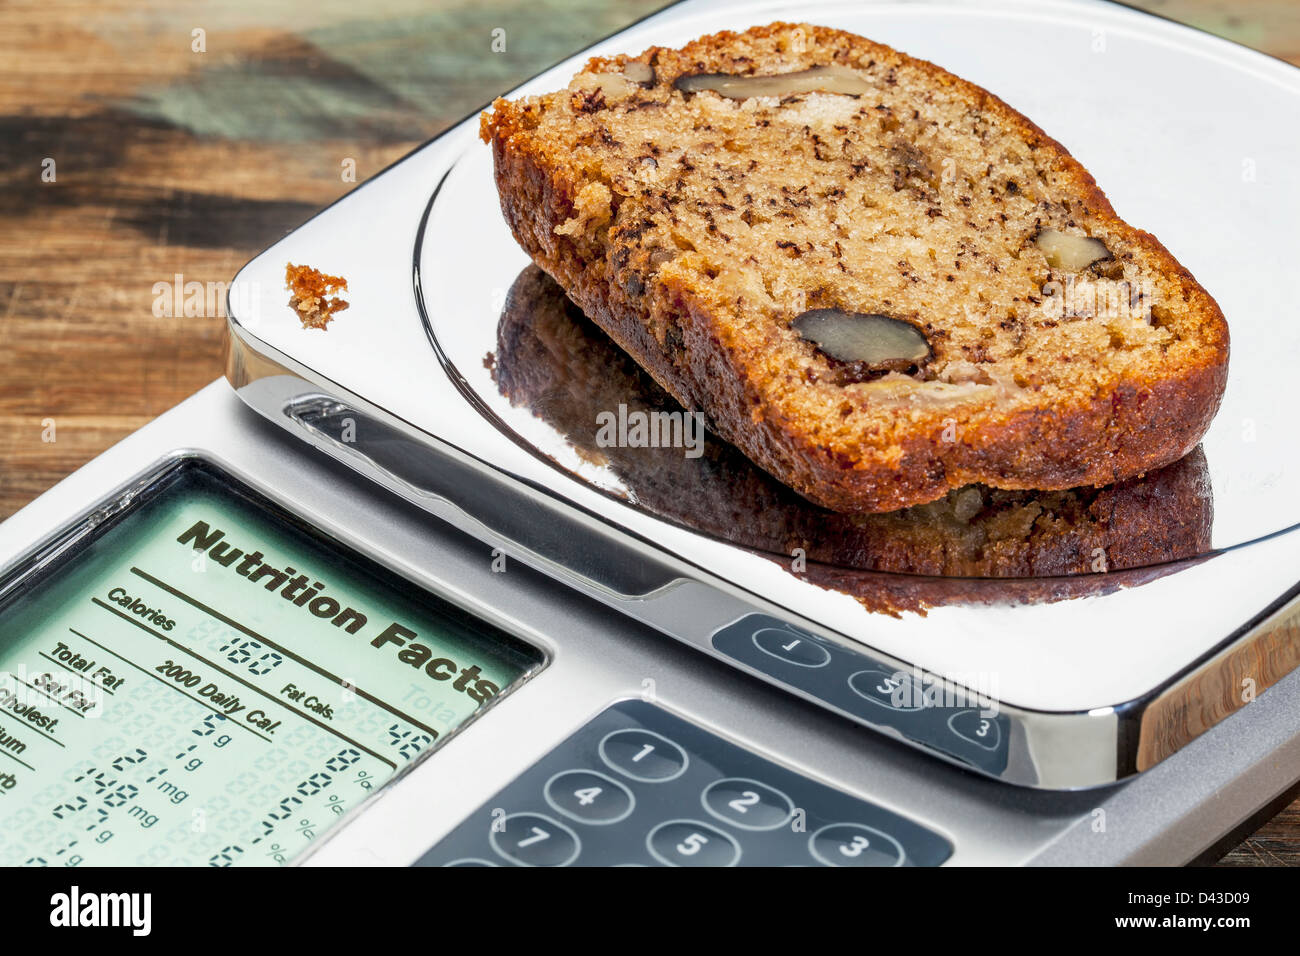 slice of banana bread with walnuts on diet scale displaying nutrition facts - a diet concept Stock Photo